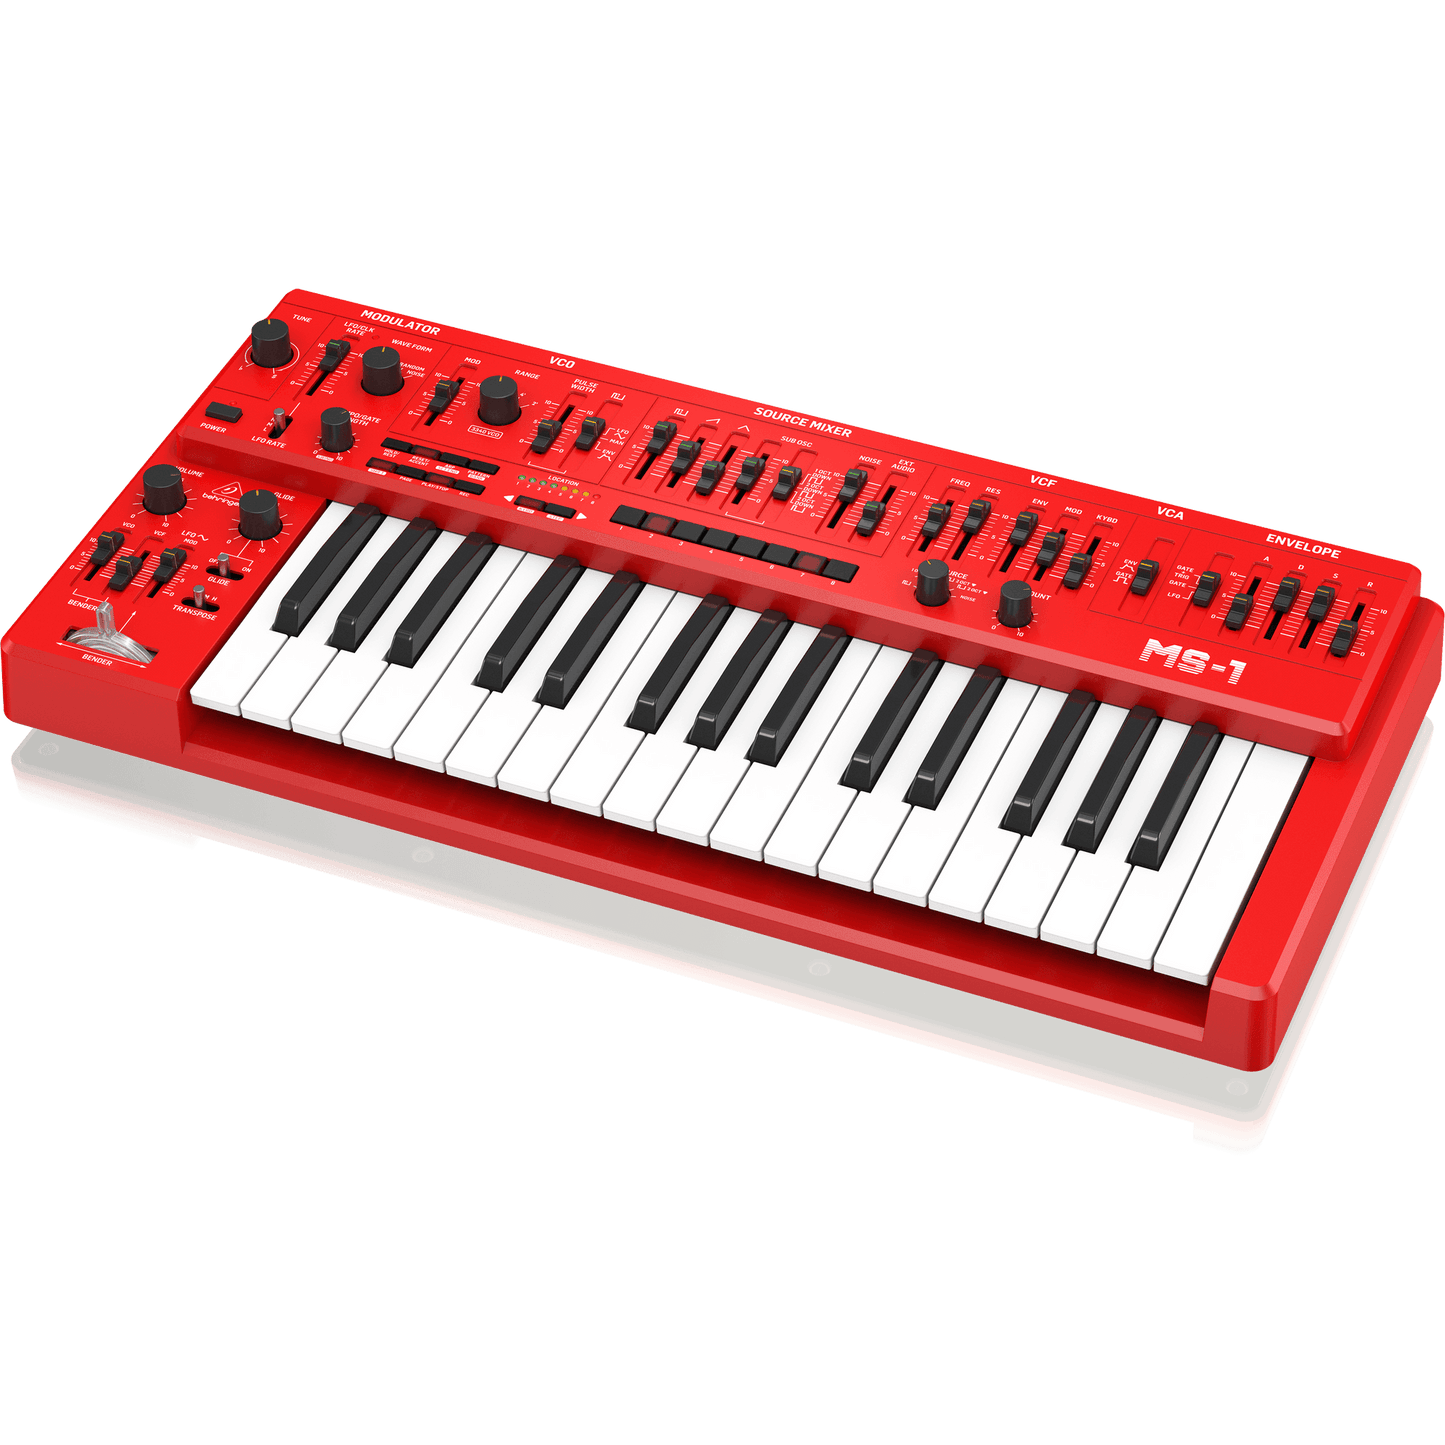 Behringer MS-1 Red Analog Synthesizer